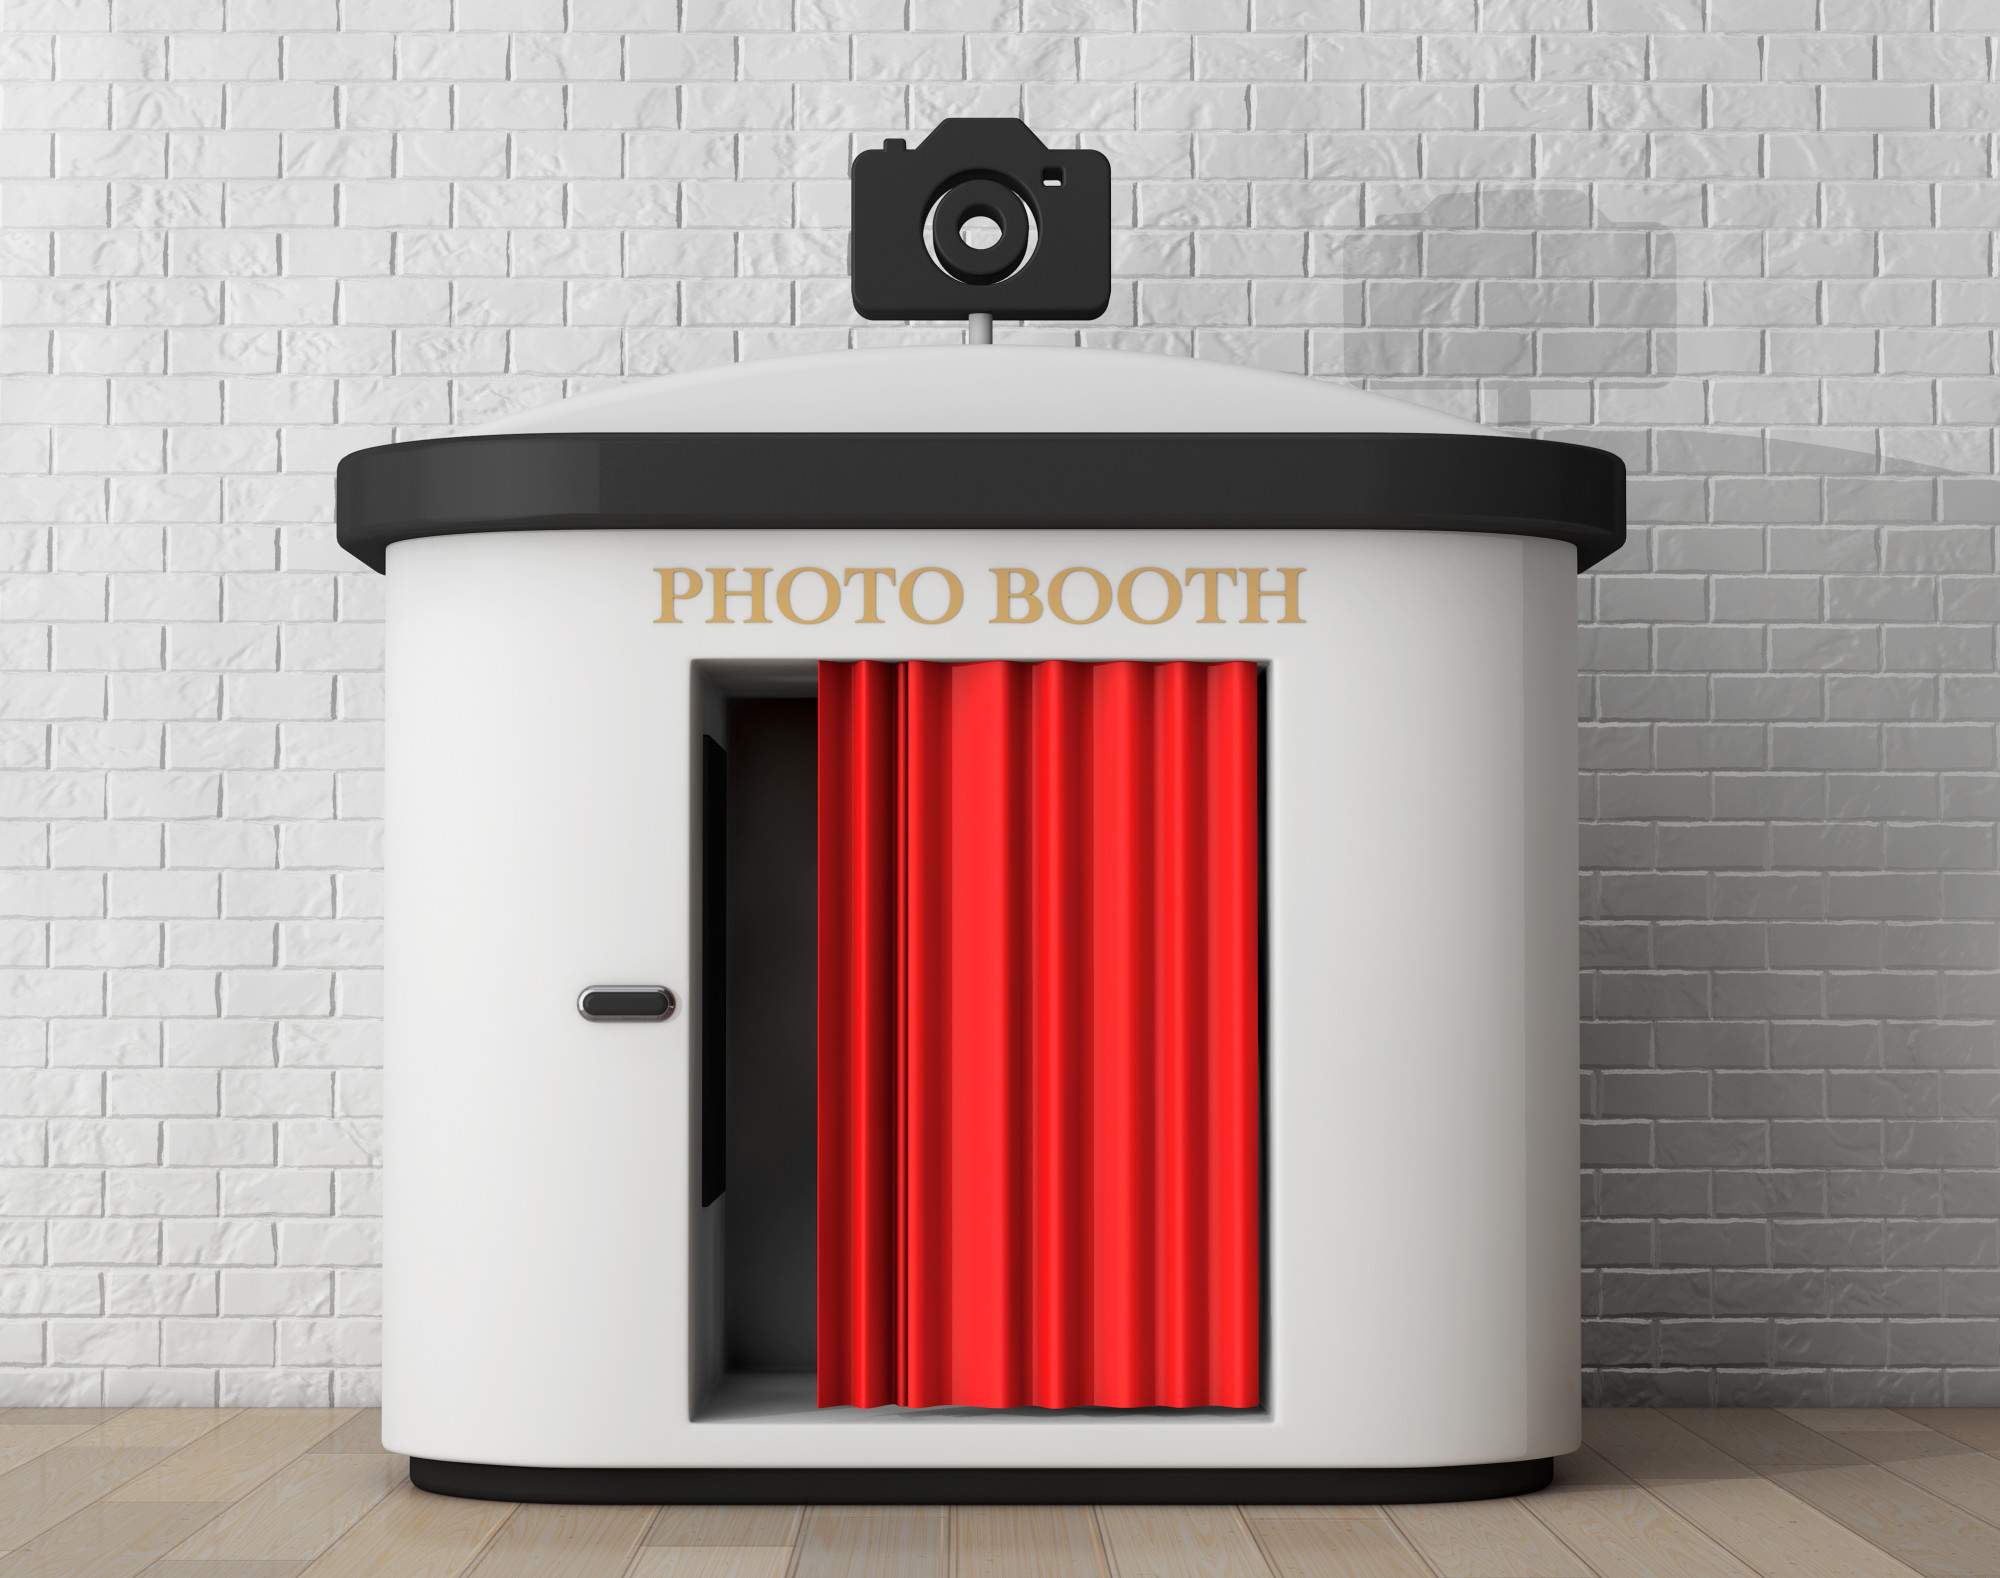 How Much Should a Photo Booth Rental Cost?